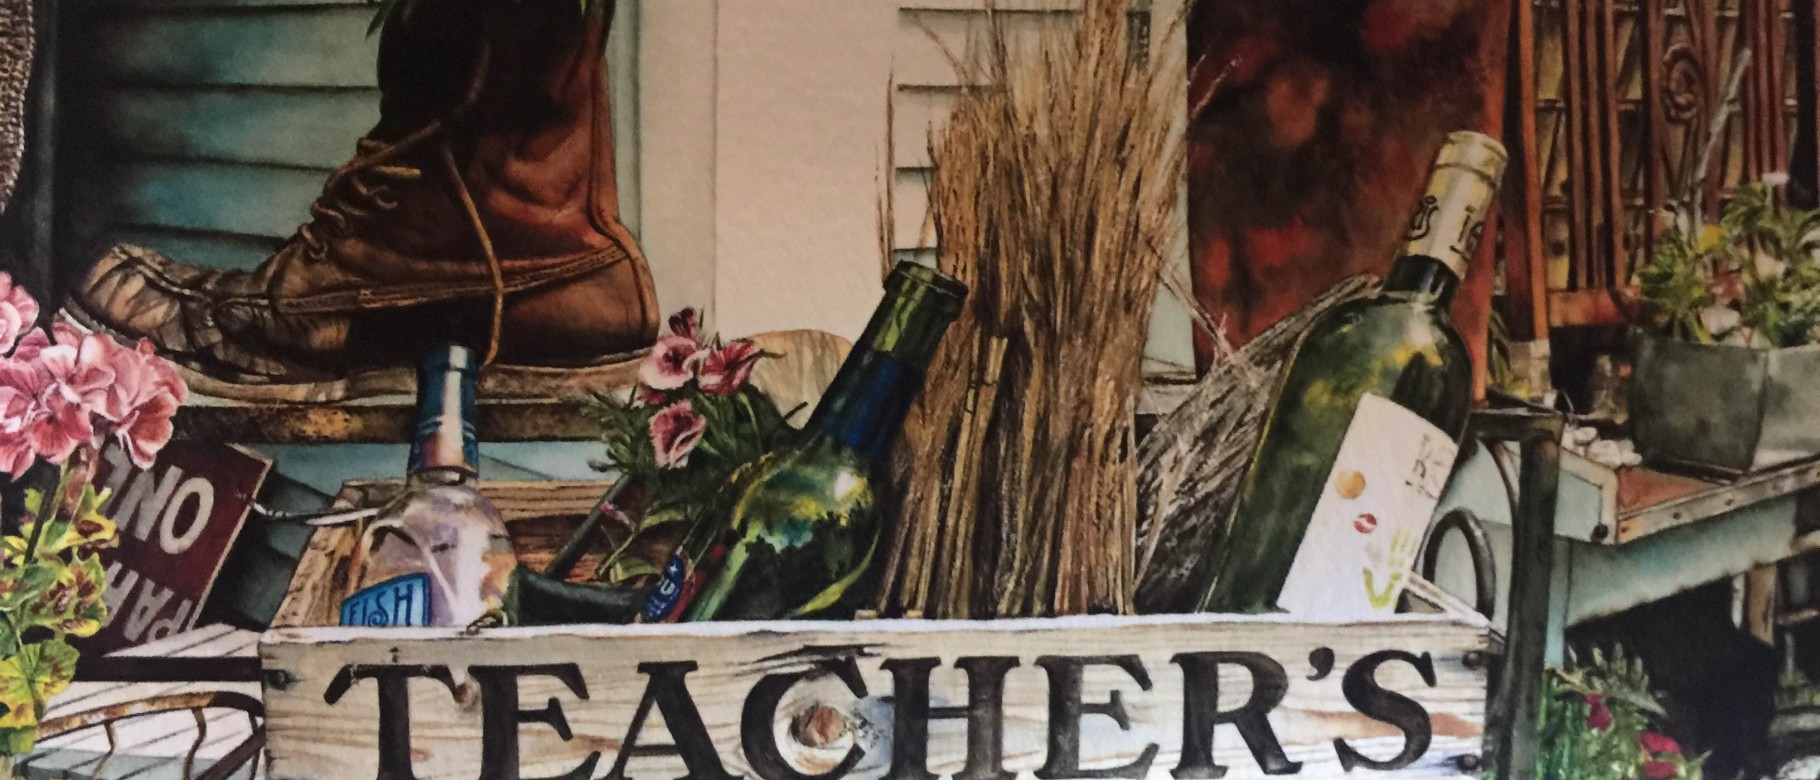 "A Toast to All that Teach" by Piper Bolduc